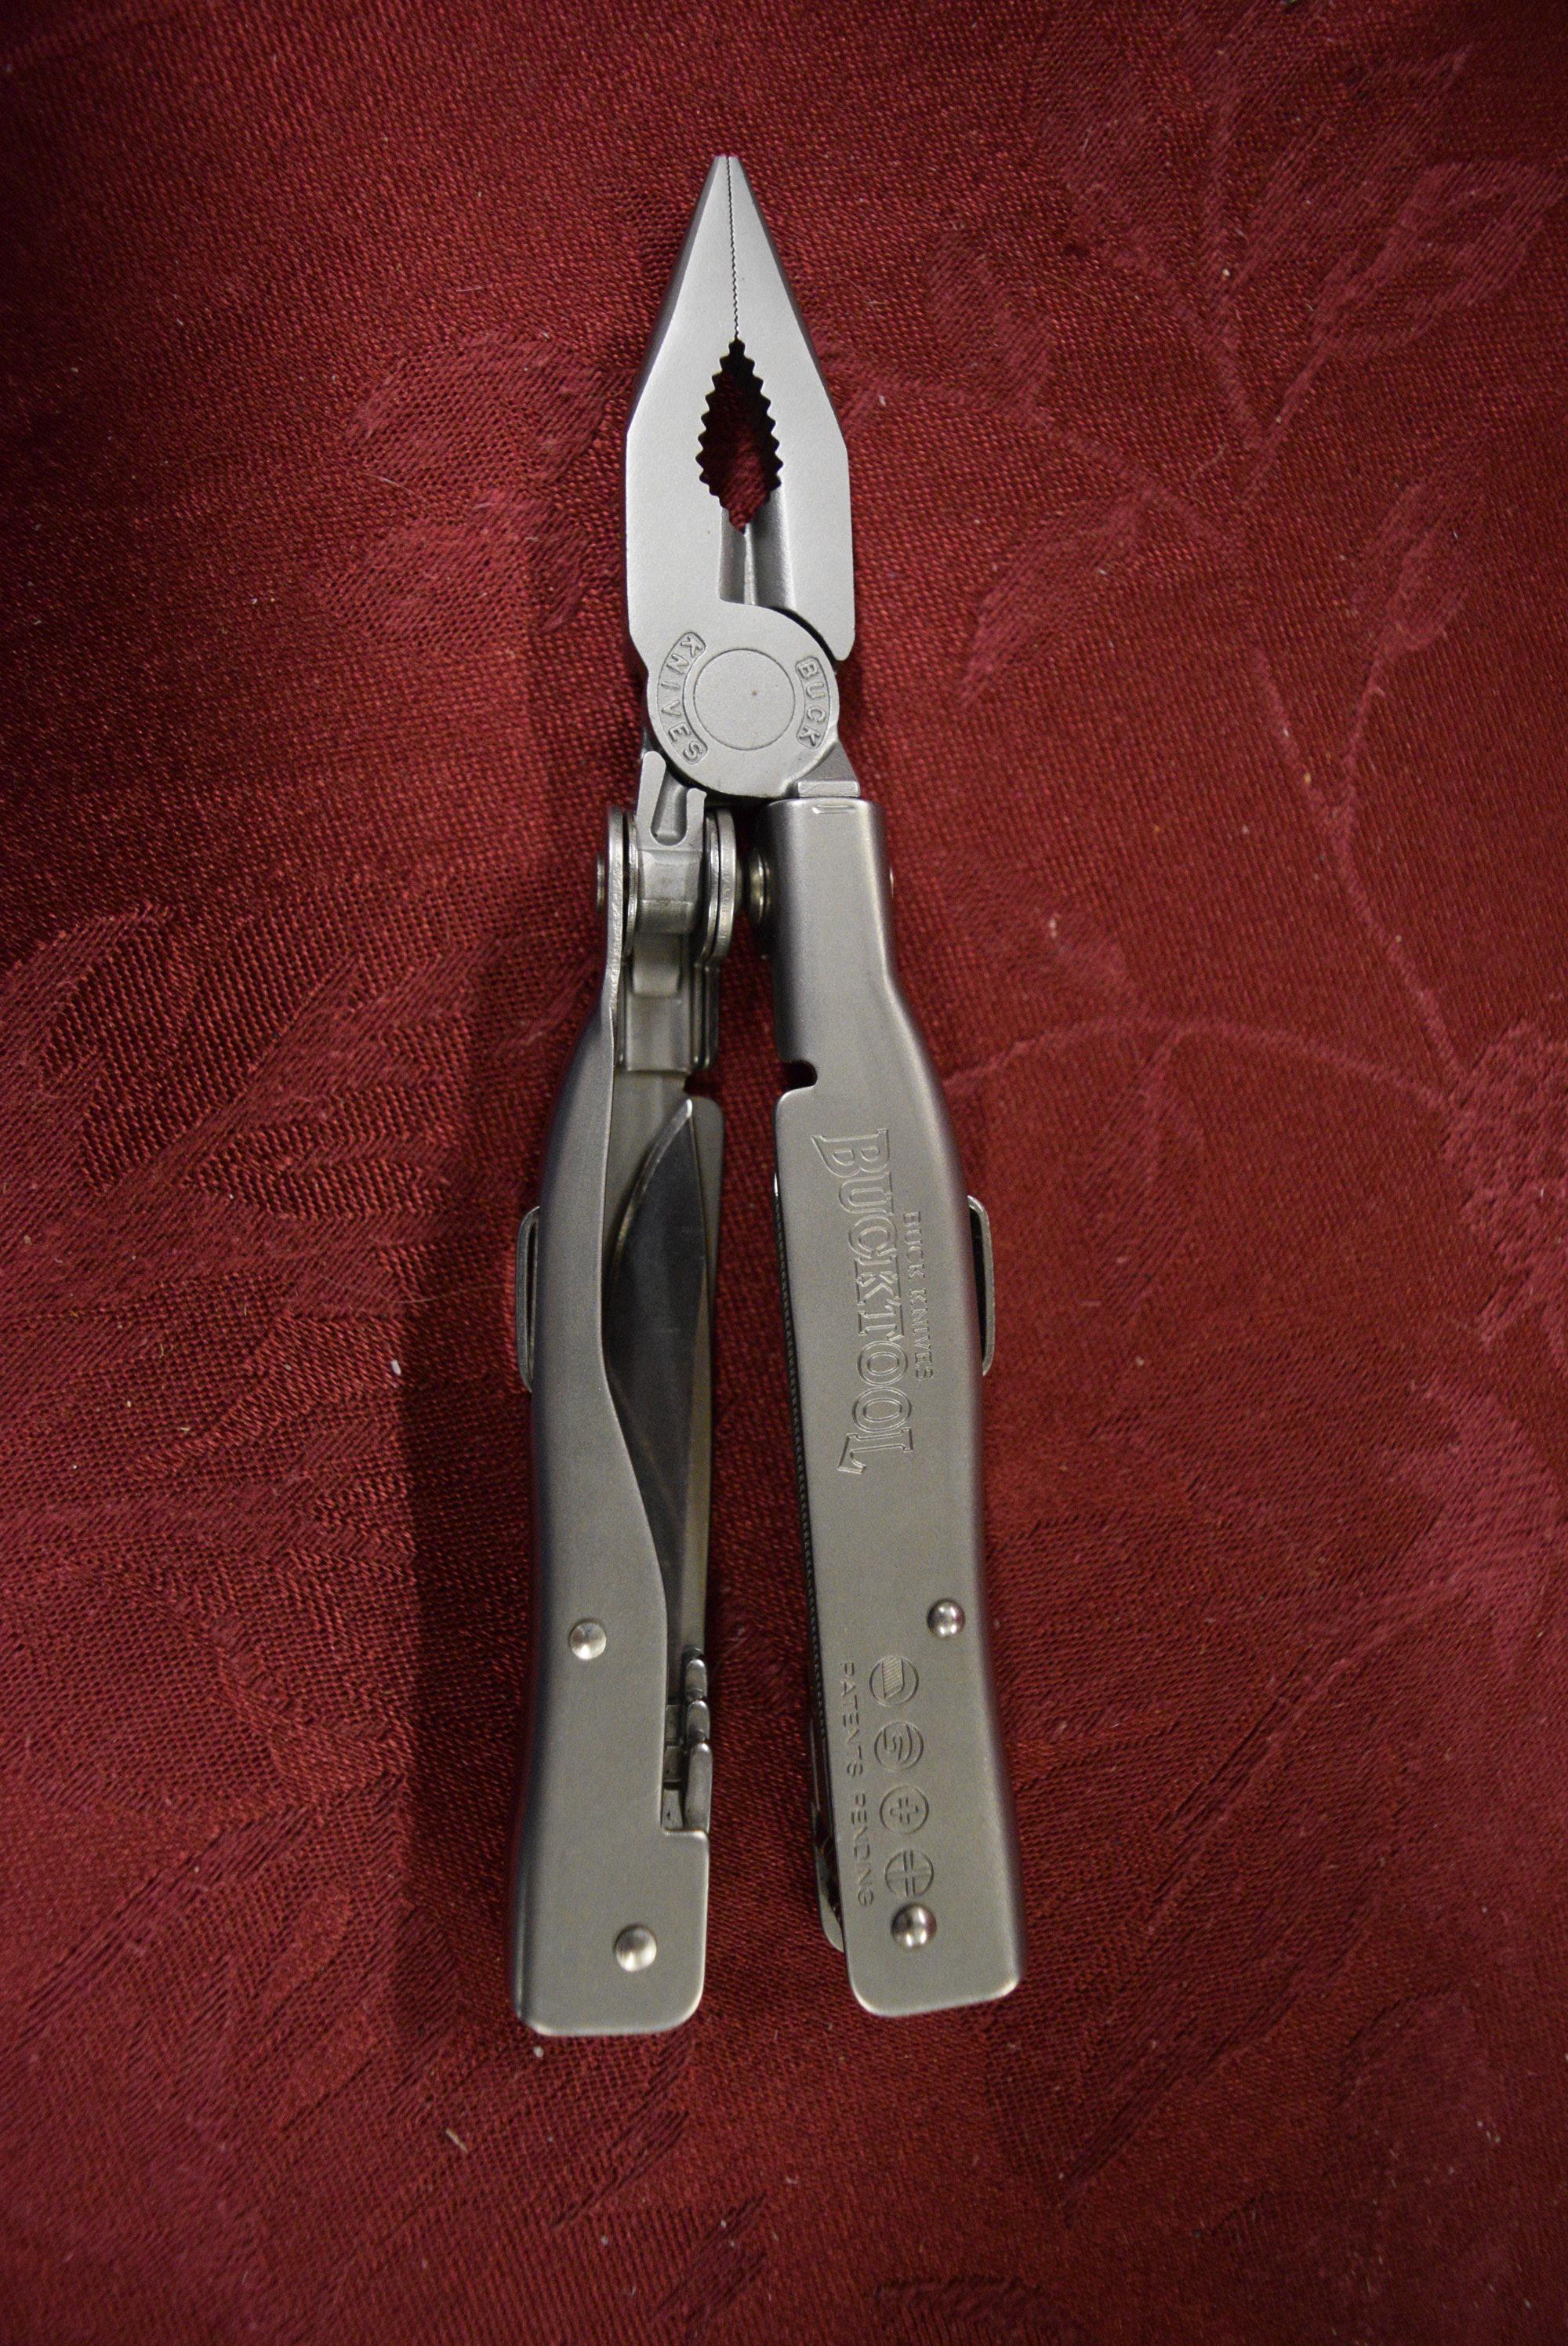 AMAZING BUCK KNIVES MULTI-TOOL AND KNIFE!